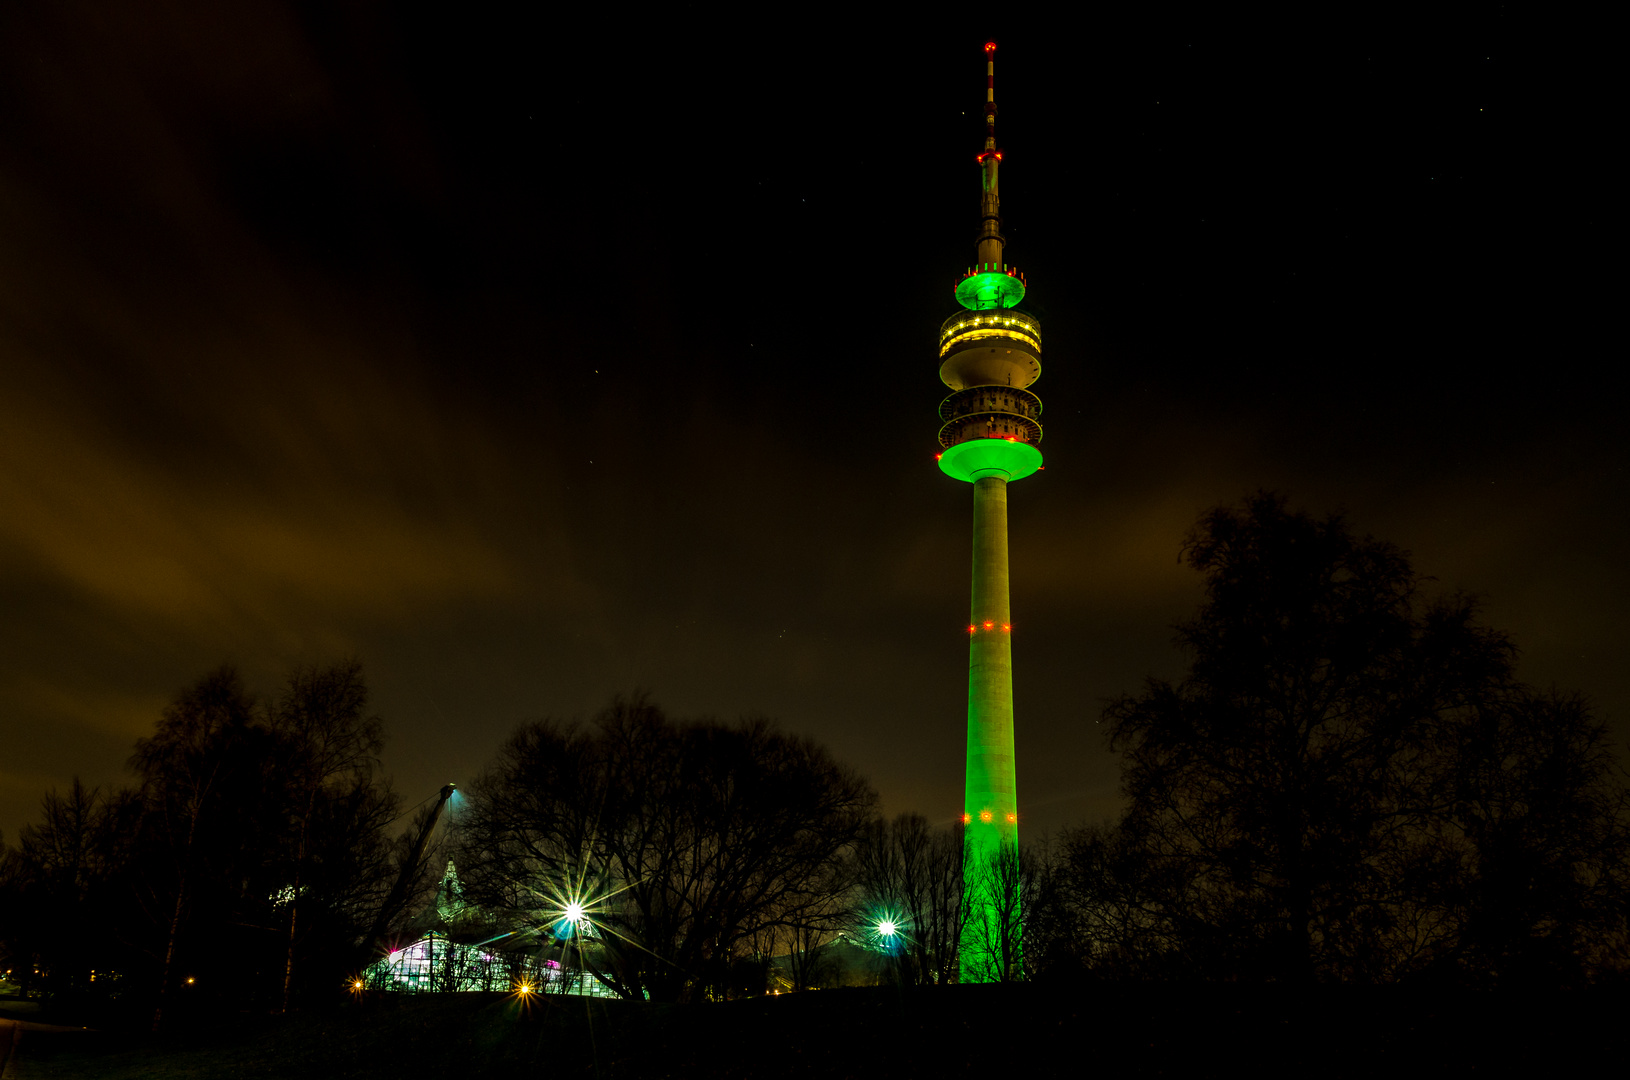 Global Greenings for St Patrick's Day 2014 - Olympiaturm München